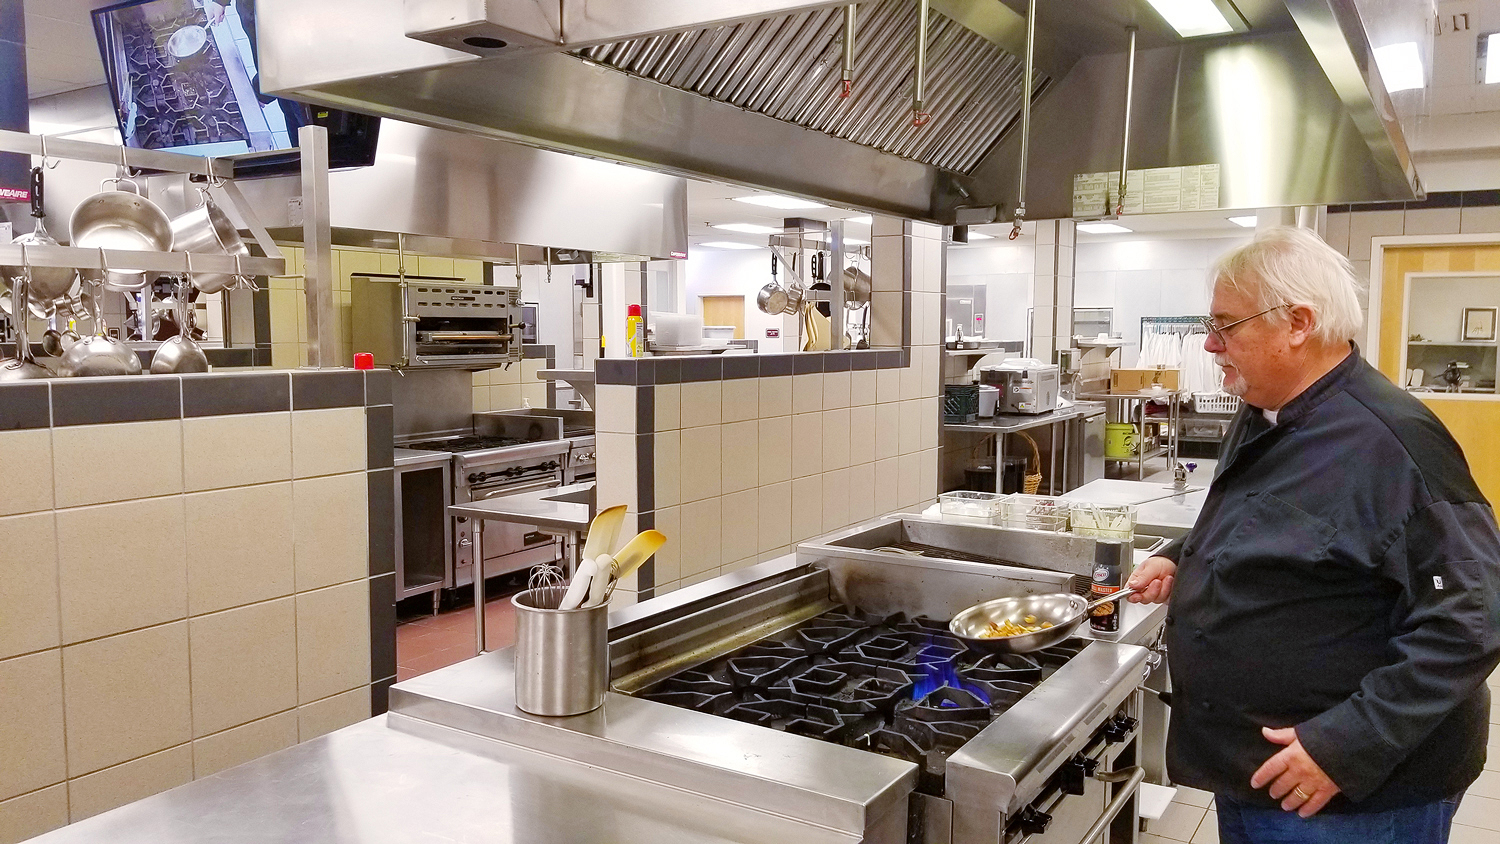 Practice sessions are reviewed on the wall-mounted displays from the instructor’s kitchen, allowing the chef to decide what works best for the recipe and would be most beneficial to the students.